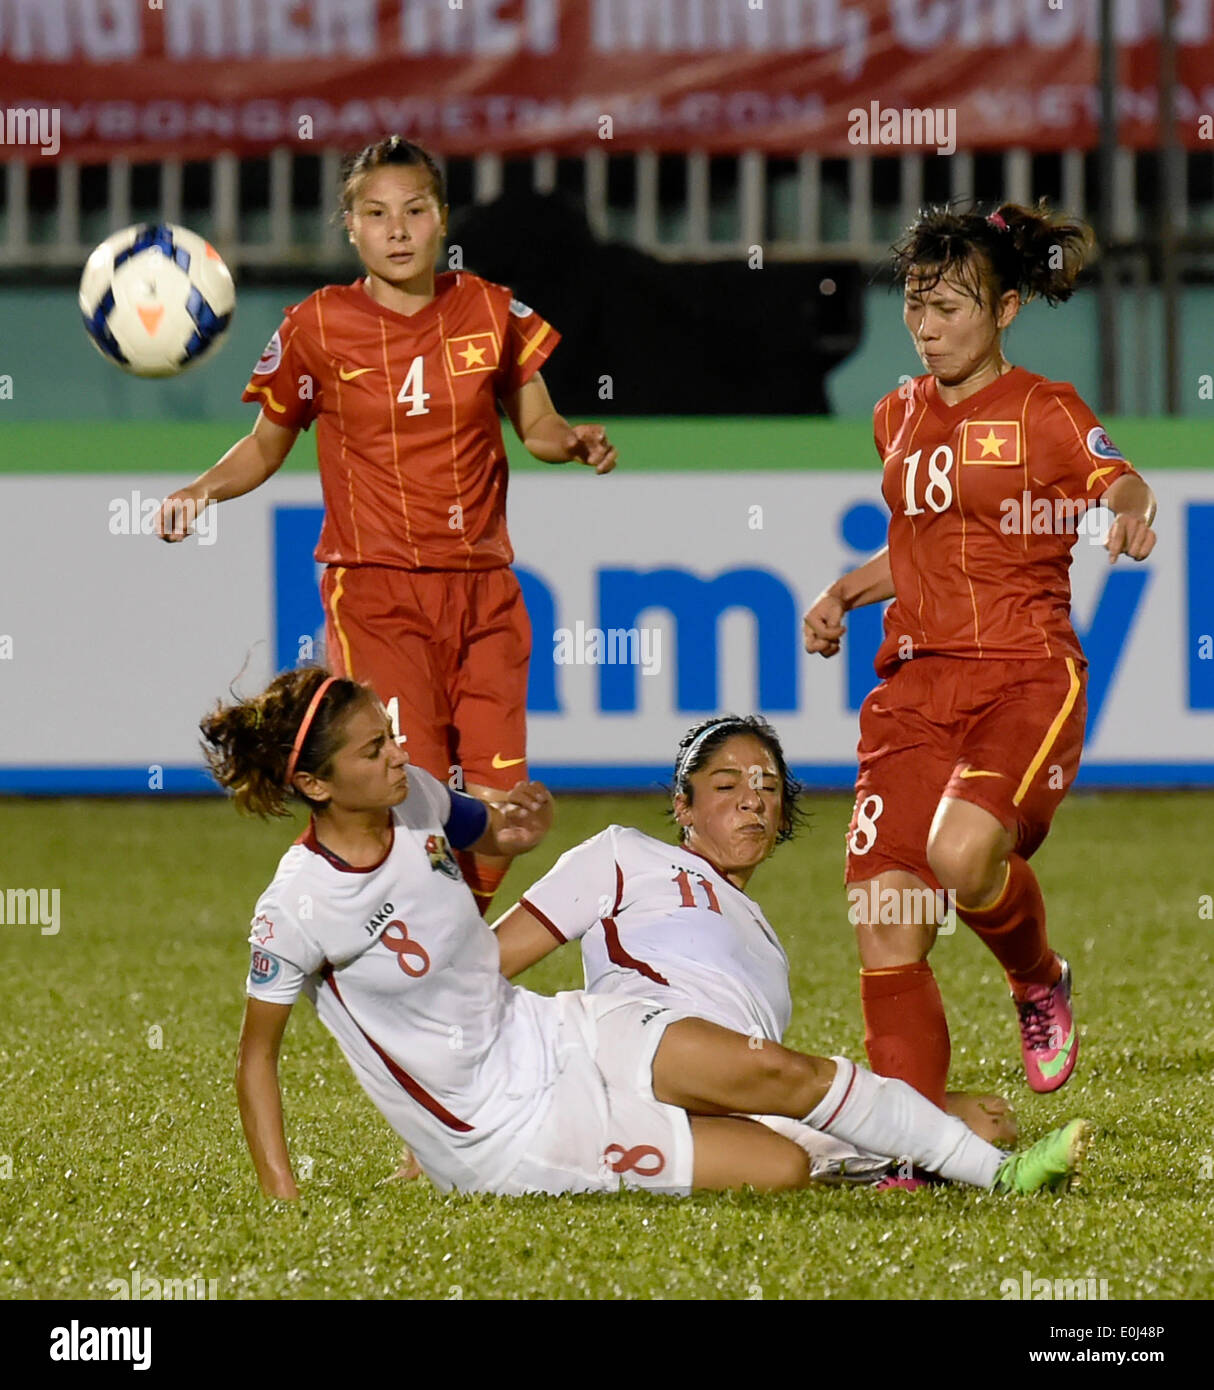 Ho Chi Minh City, Vietnam. 14th May, 2014. Vietnam's Nguyen Thi Lieu (1st R) vies with Jordan's Maysa Ziad Mahmoud Jbarah (2nd R) and Stephanie Mazen Yousef Alnaber (3rd R) during their Group A match at the 2014 AFC Women's Asian Cup held at Thong Nhat Stadium in Ho Chi Minh city, Vietnam, May 14, 2014. Vietnam beat Jordan 3-1. © He Jingjia/Xinhua/Alamy Live News Stock Photo